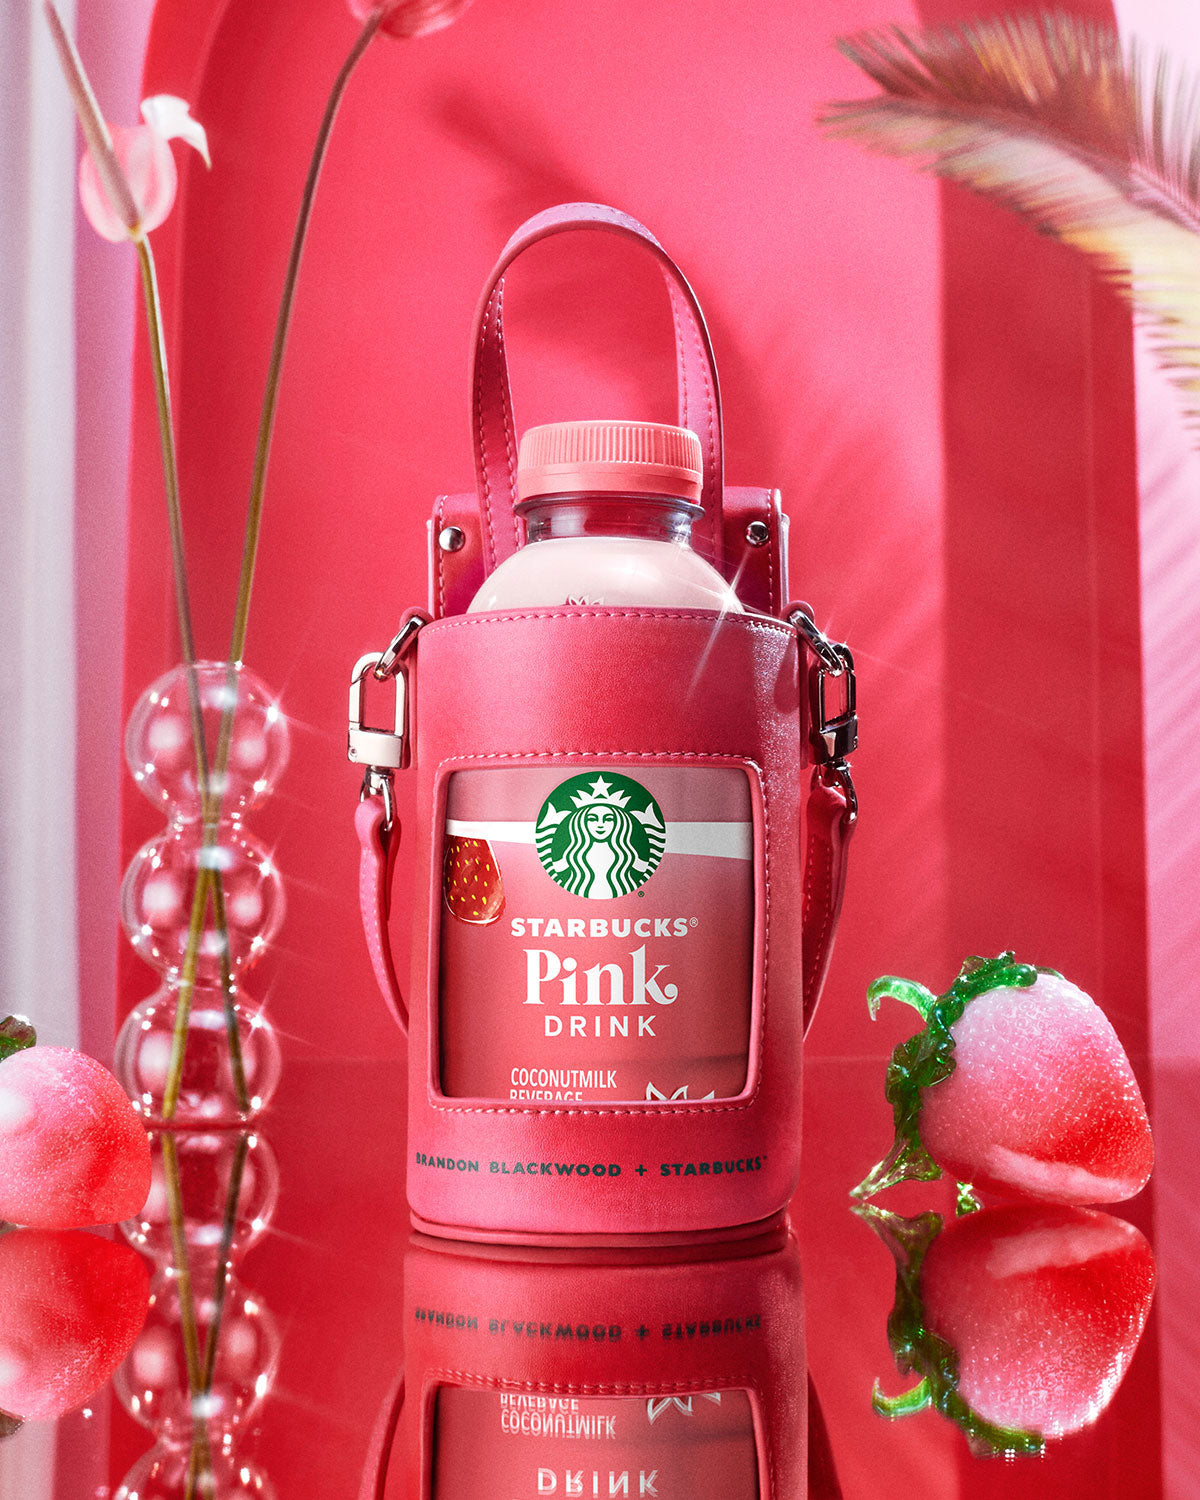 Pink Fashion Nyc - Our best seller Lv inspired Starbucks Cup in